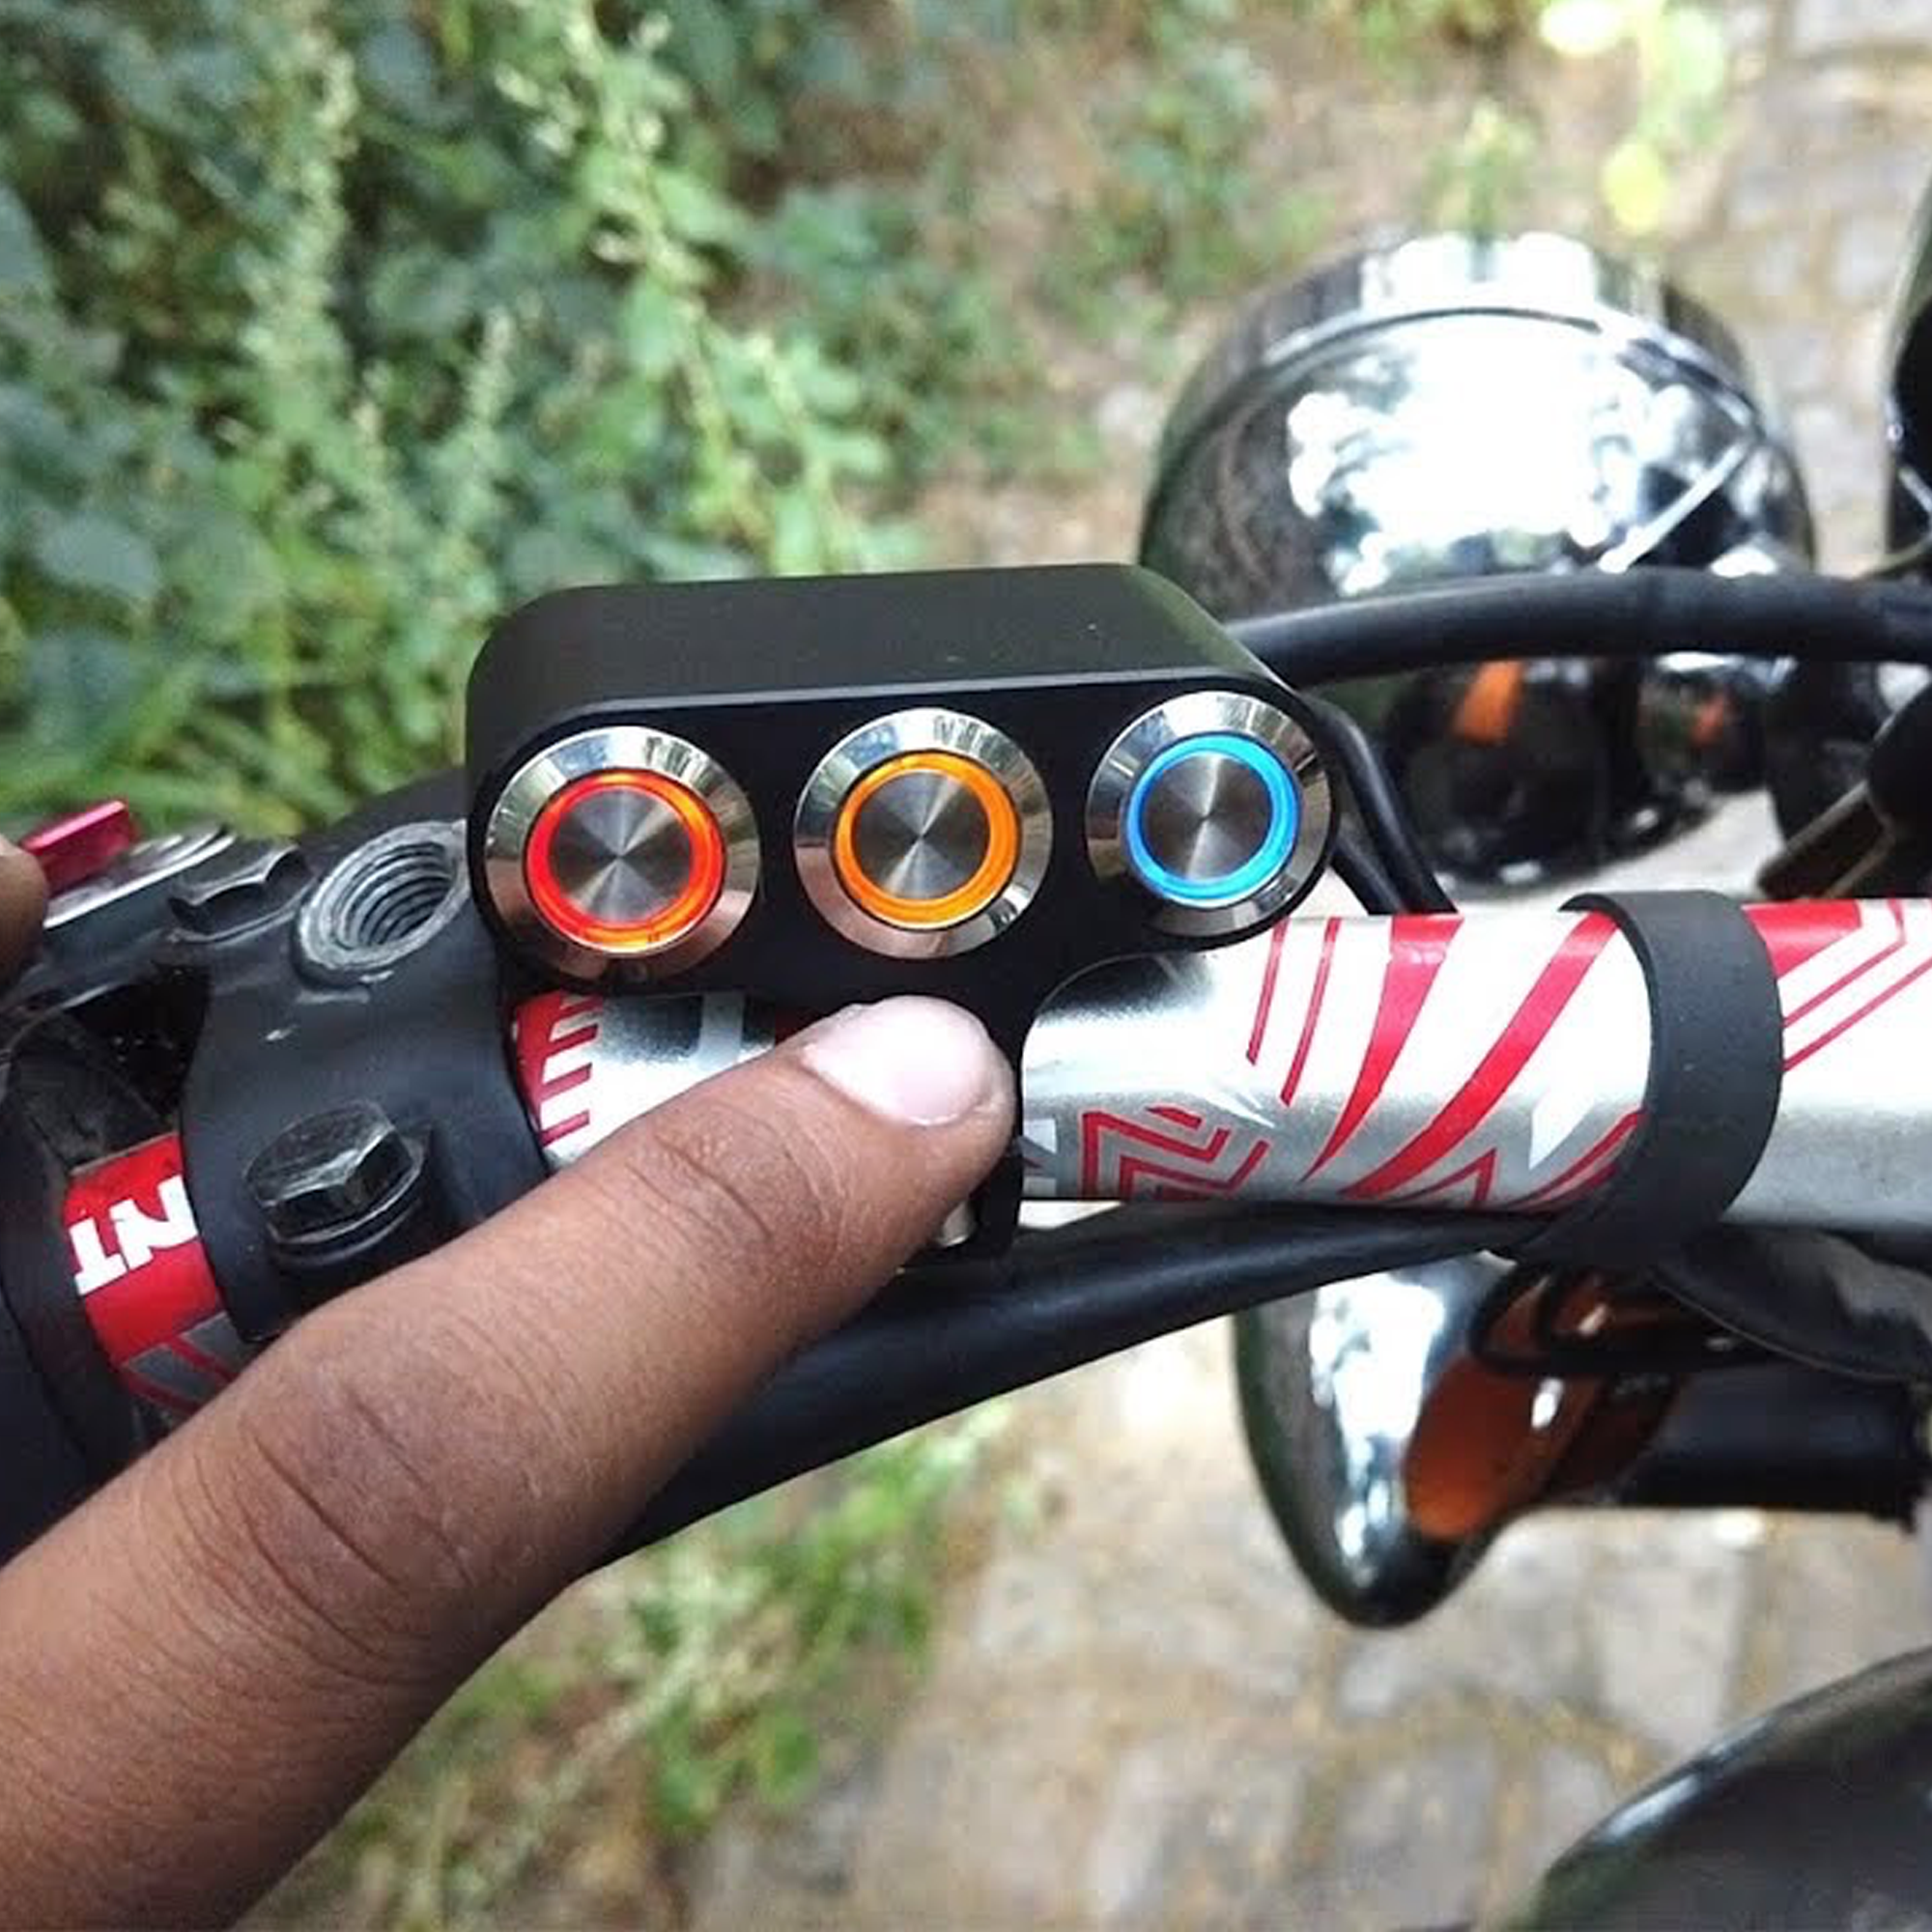 Silver Billet Buttons Installed on Motorcycle Handlebar